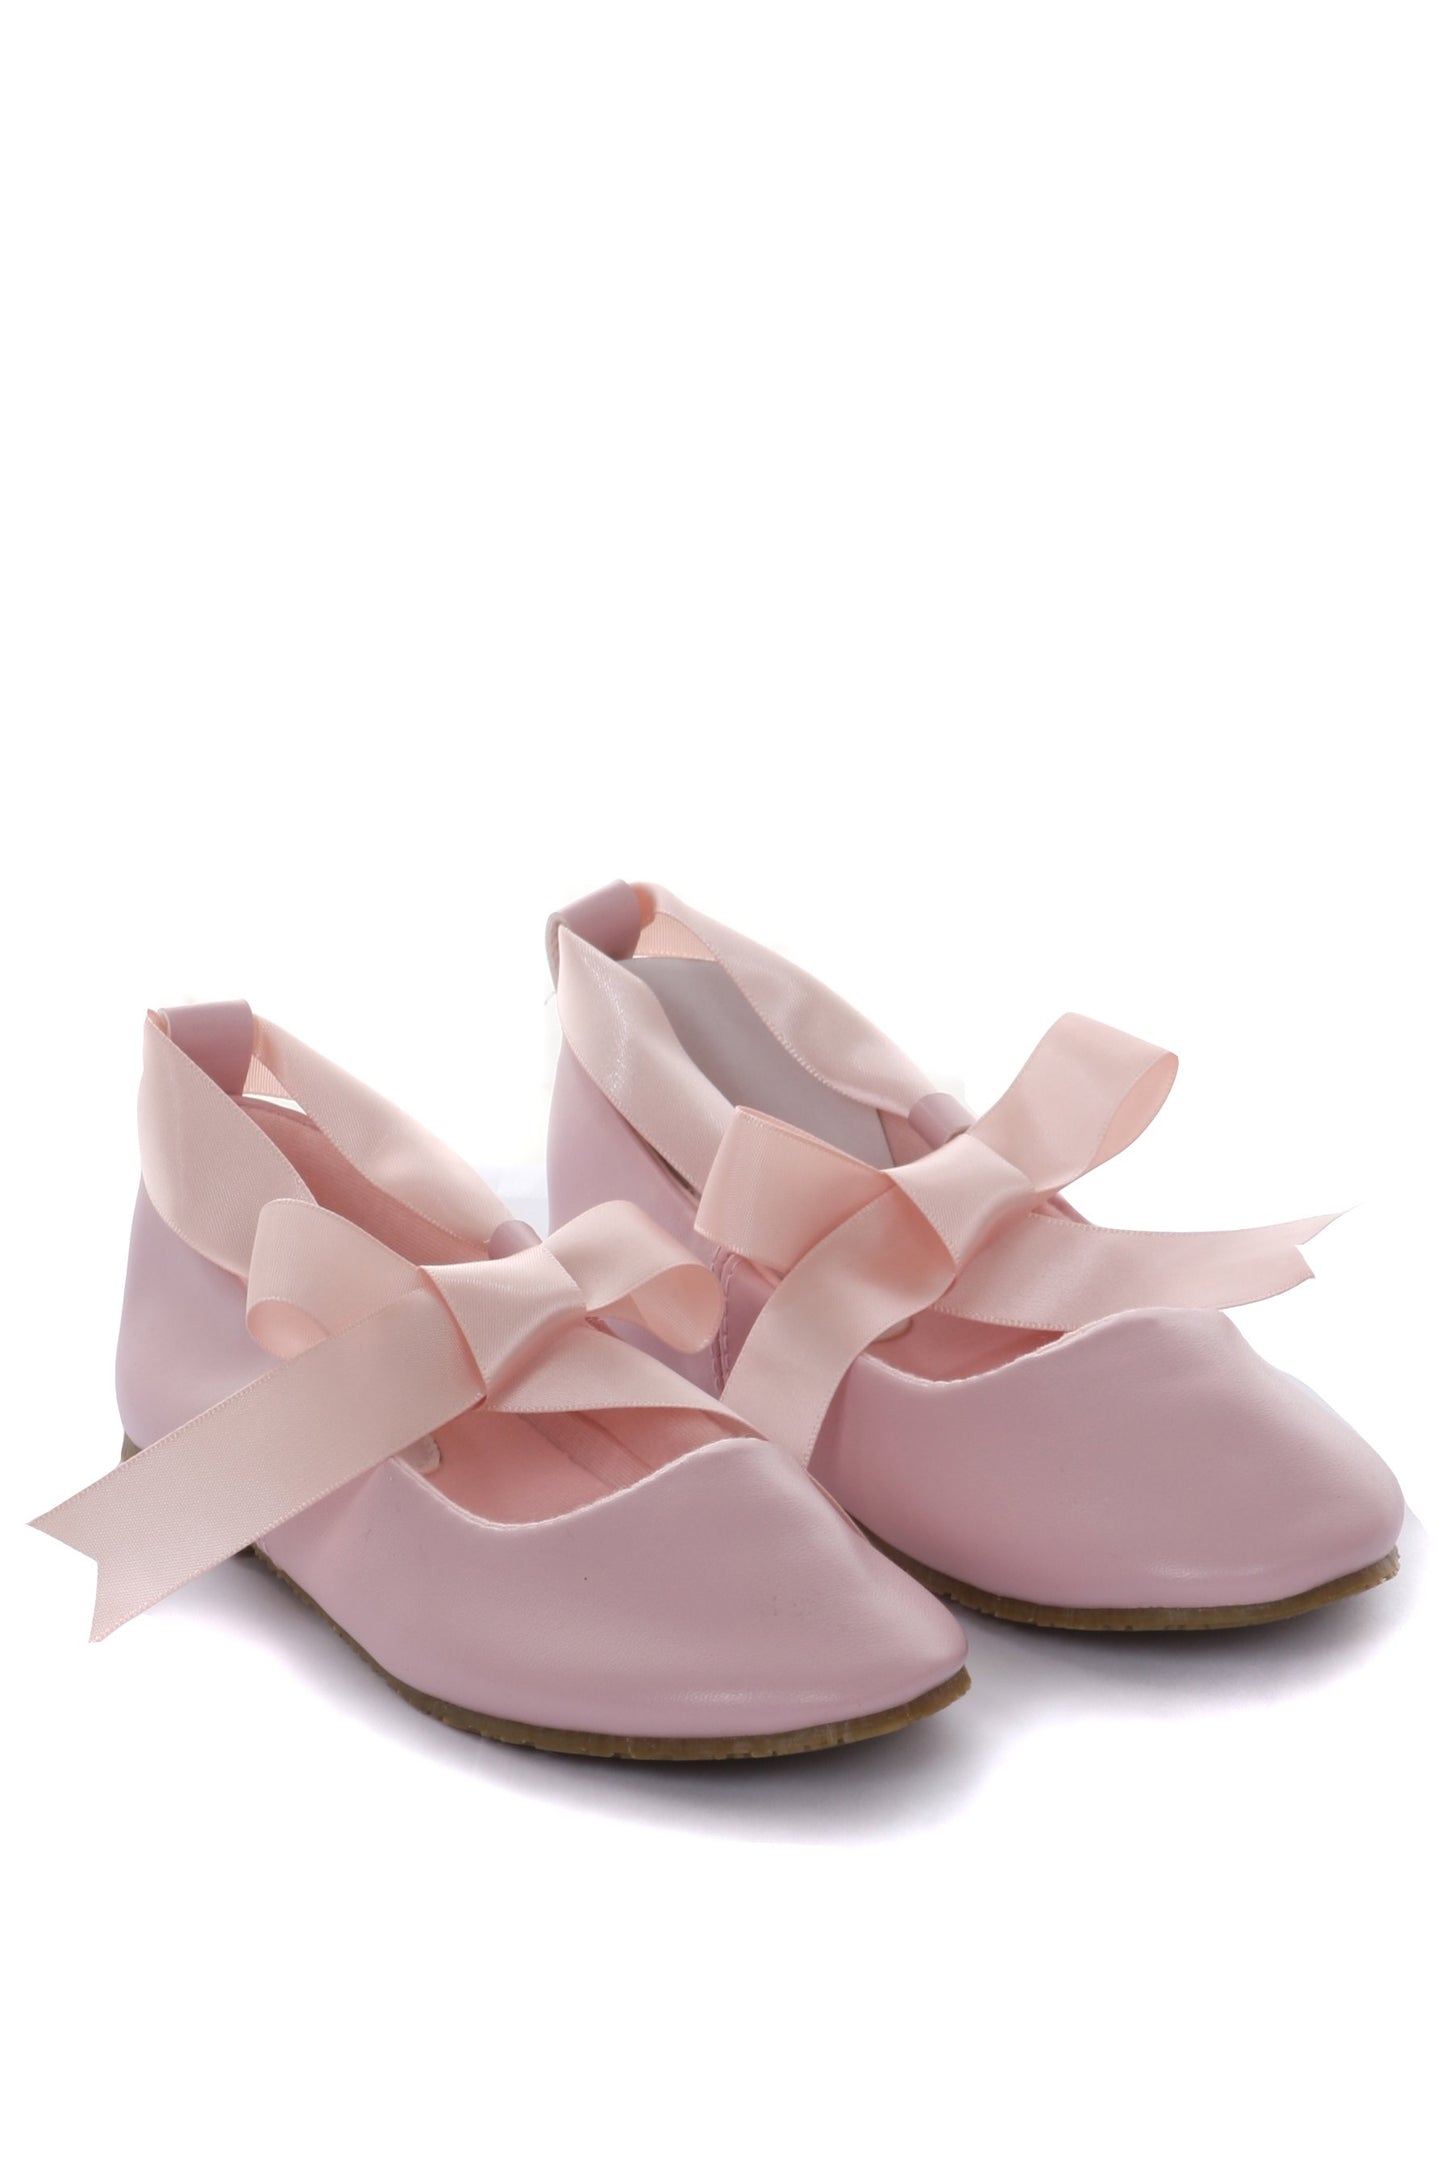 Shoes - Ballerina Shoes W/ Ribbon Tie